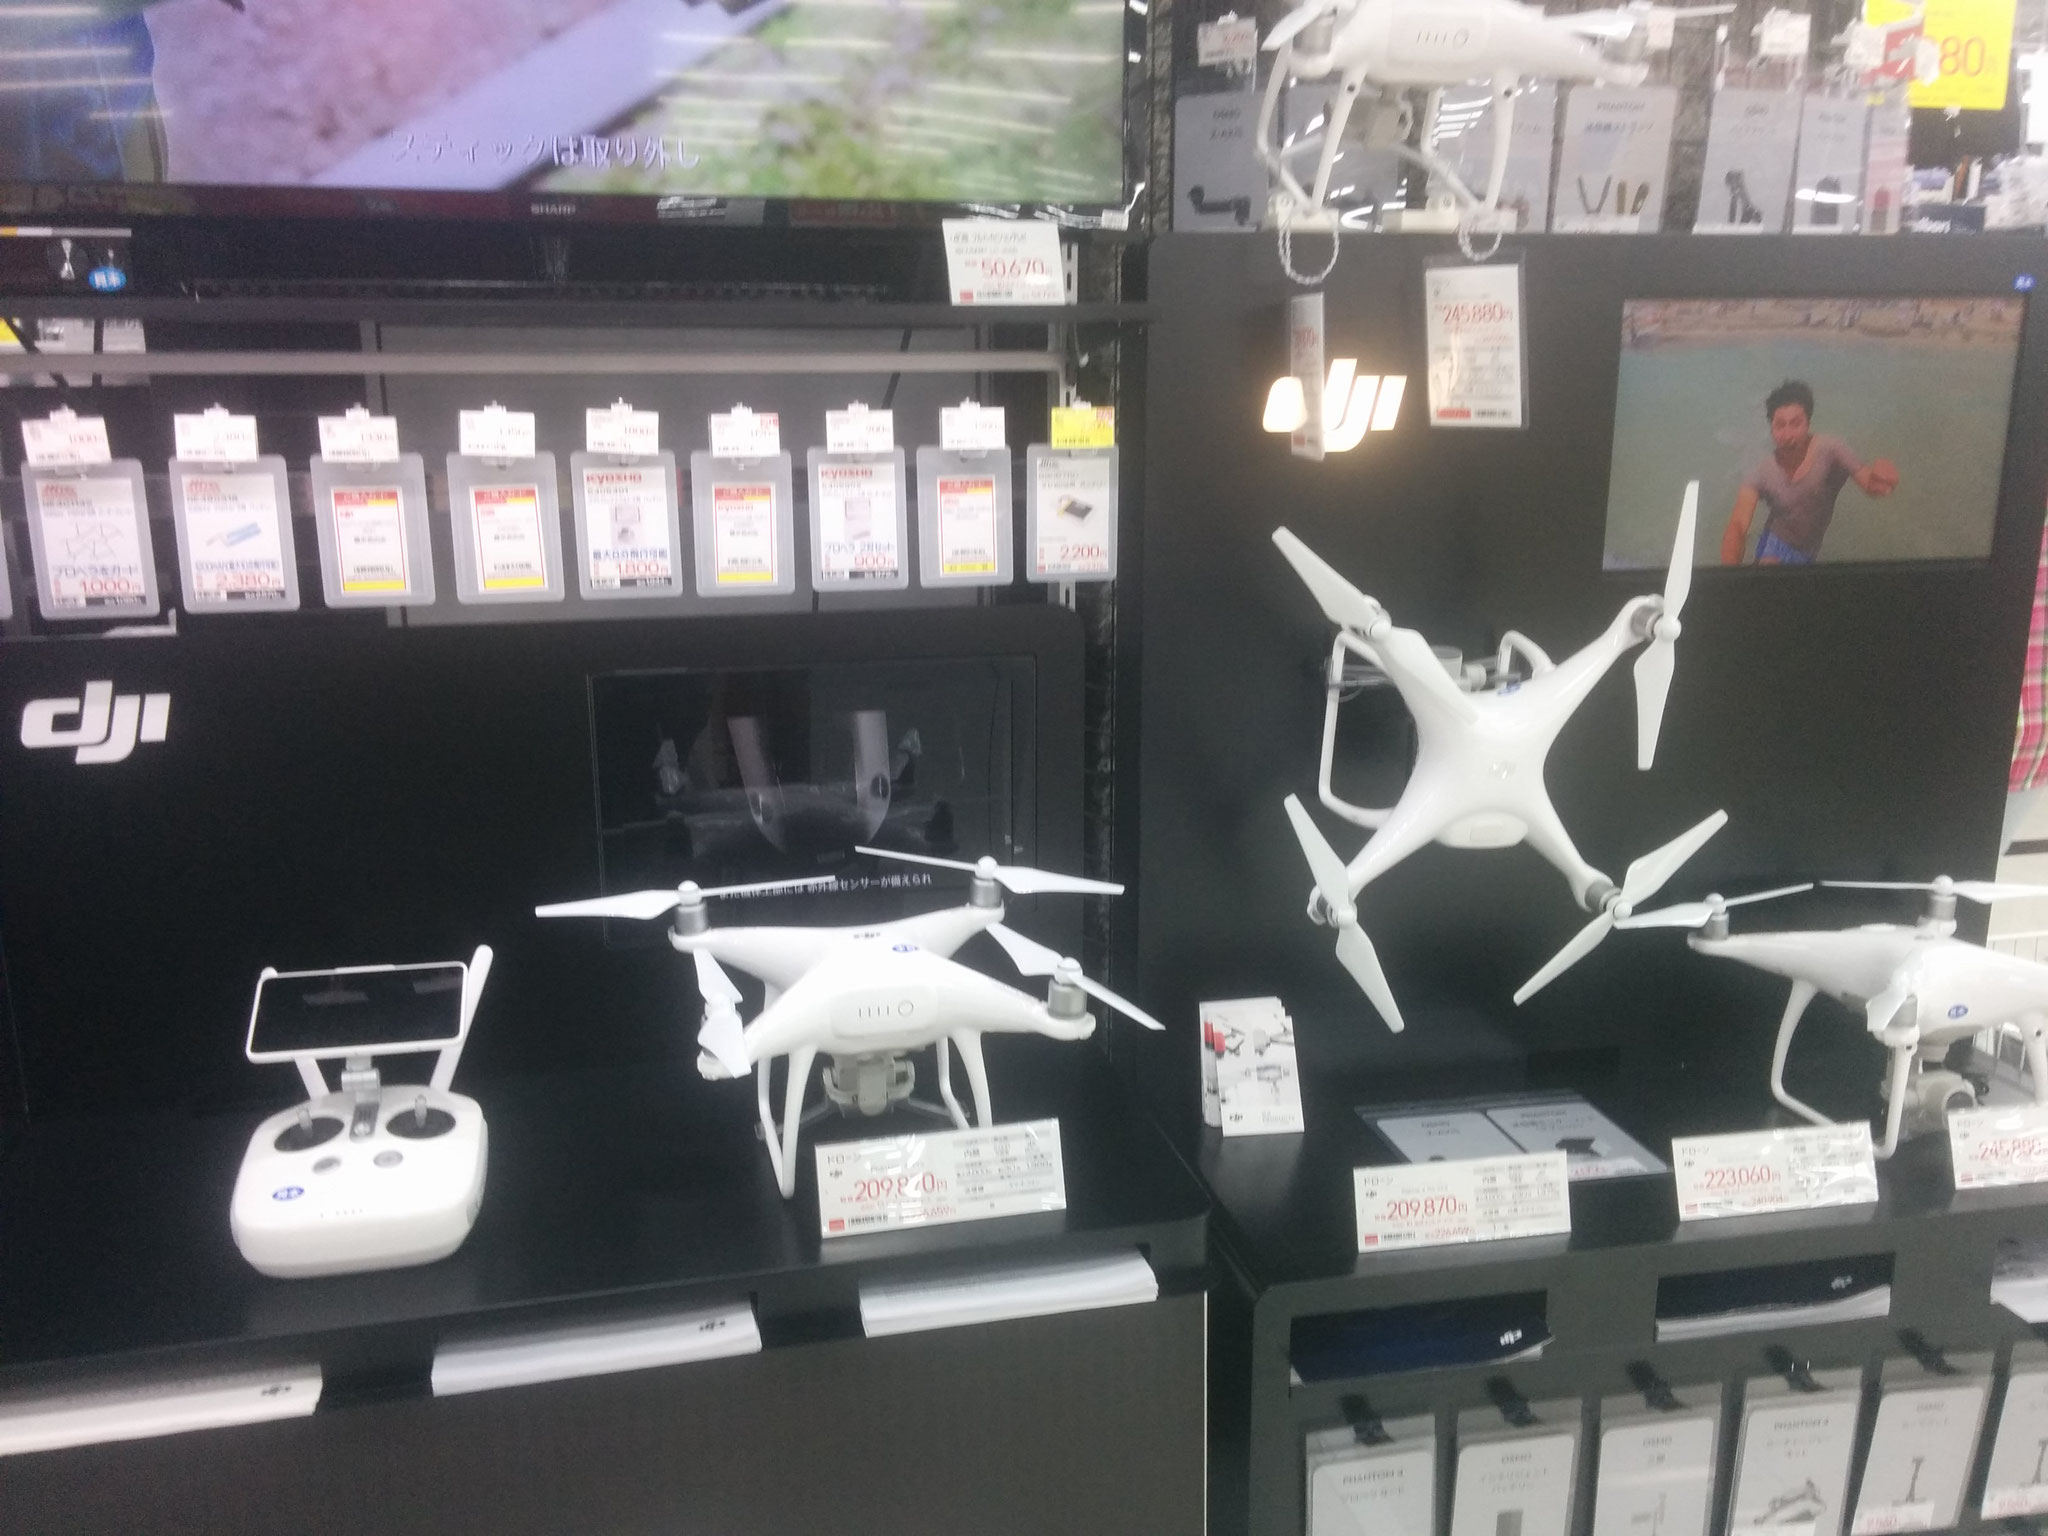 8 they sell drones at the mall!